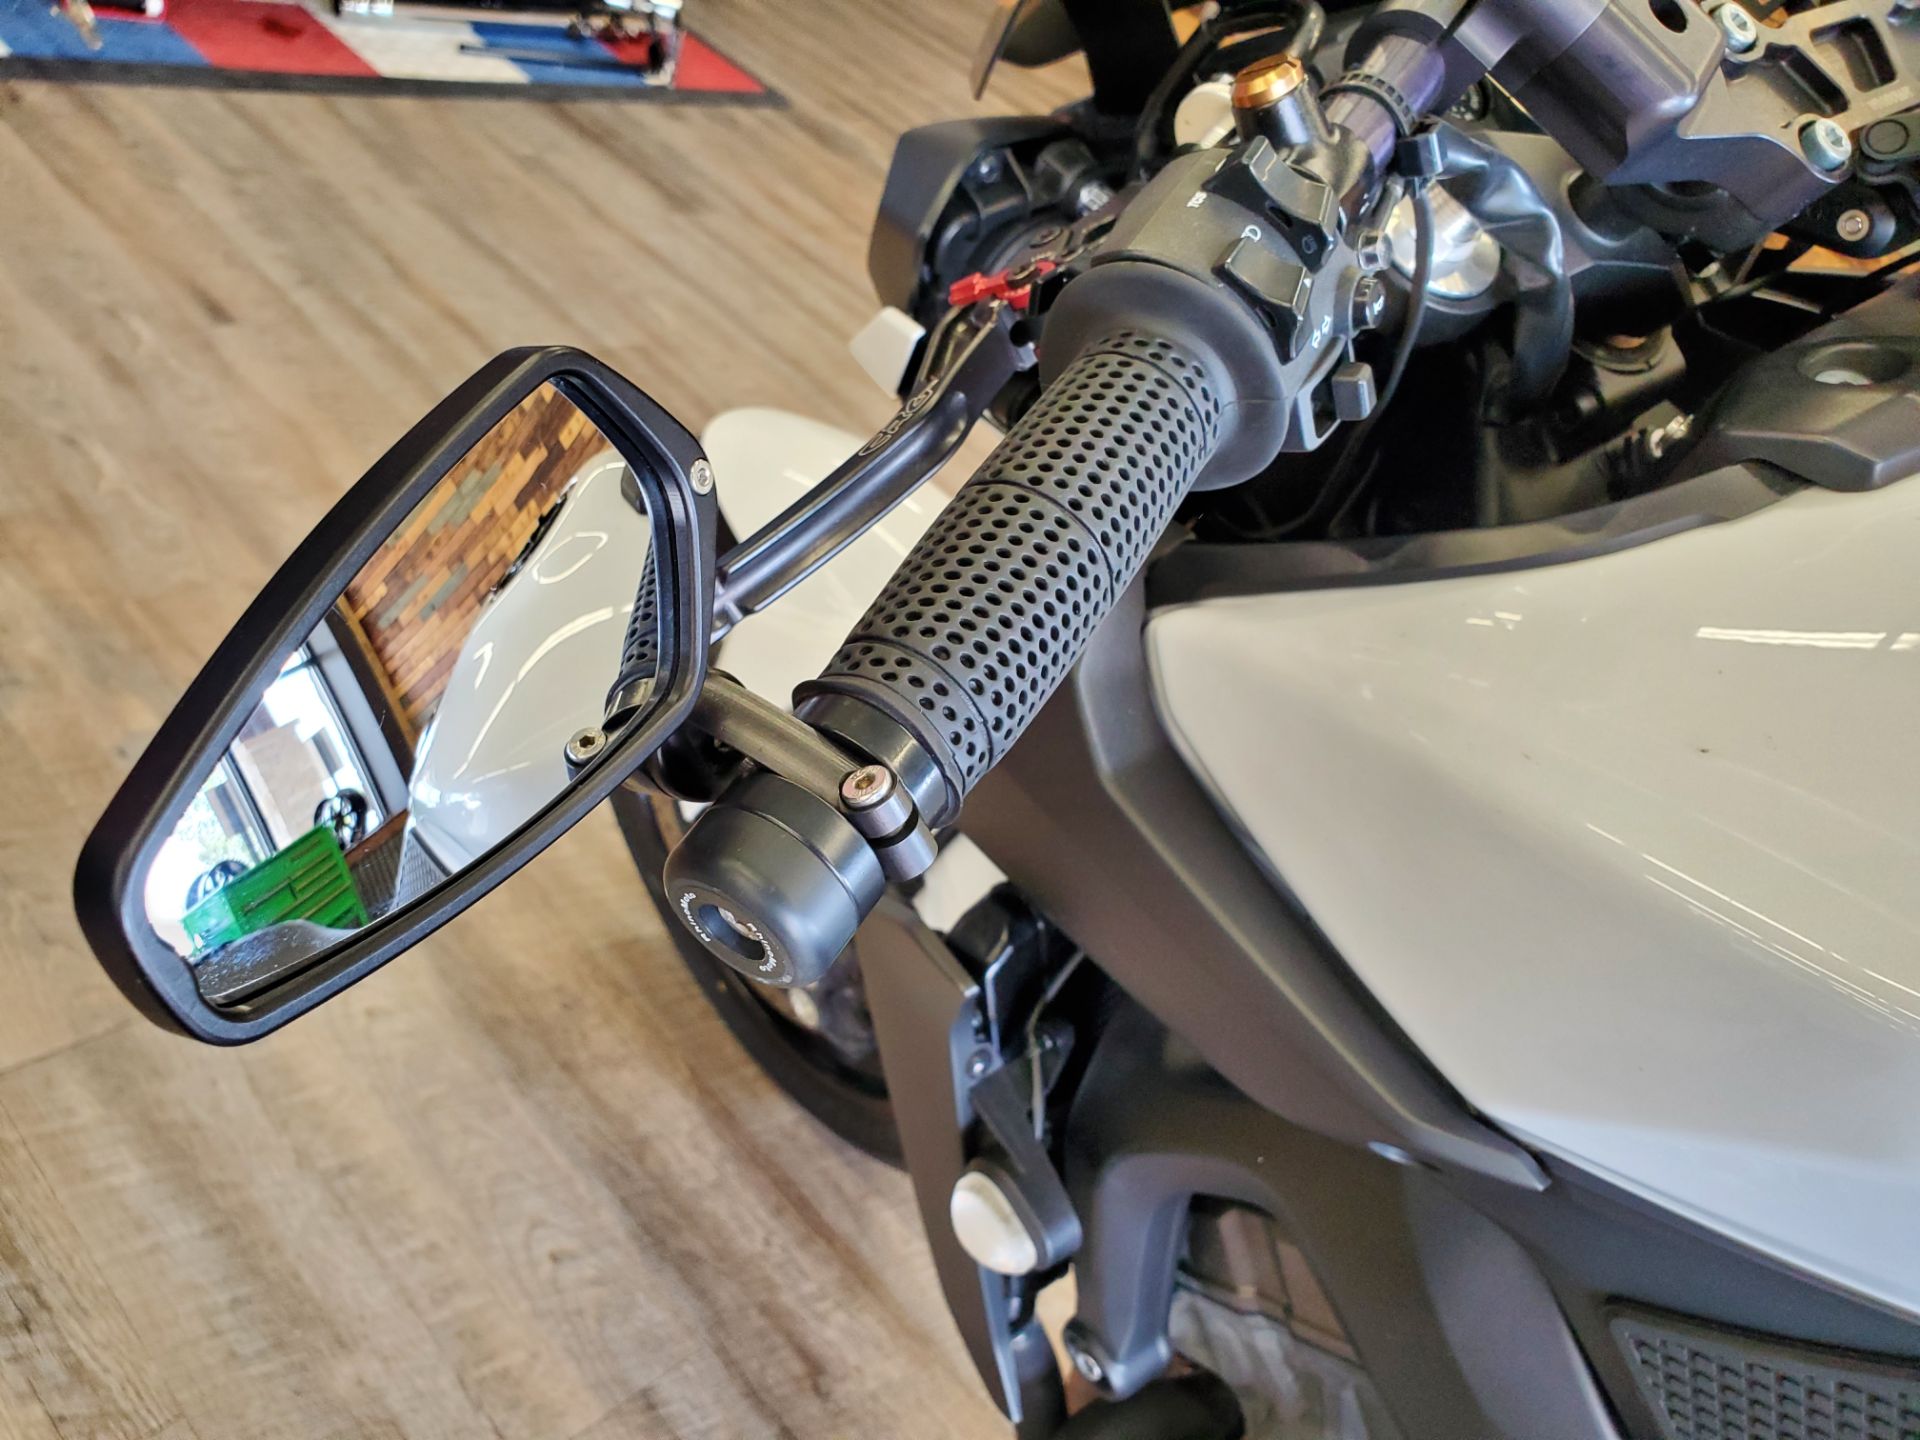 Aftermarket Grips, Bar Ends, Mirrors - Photo 23